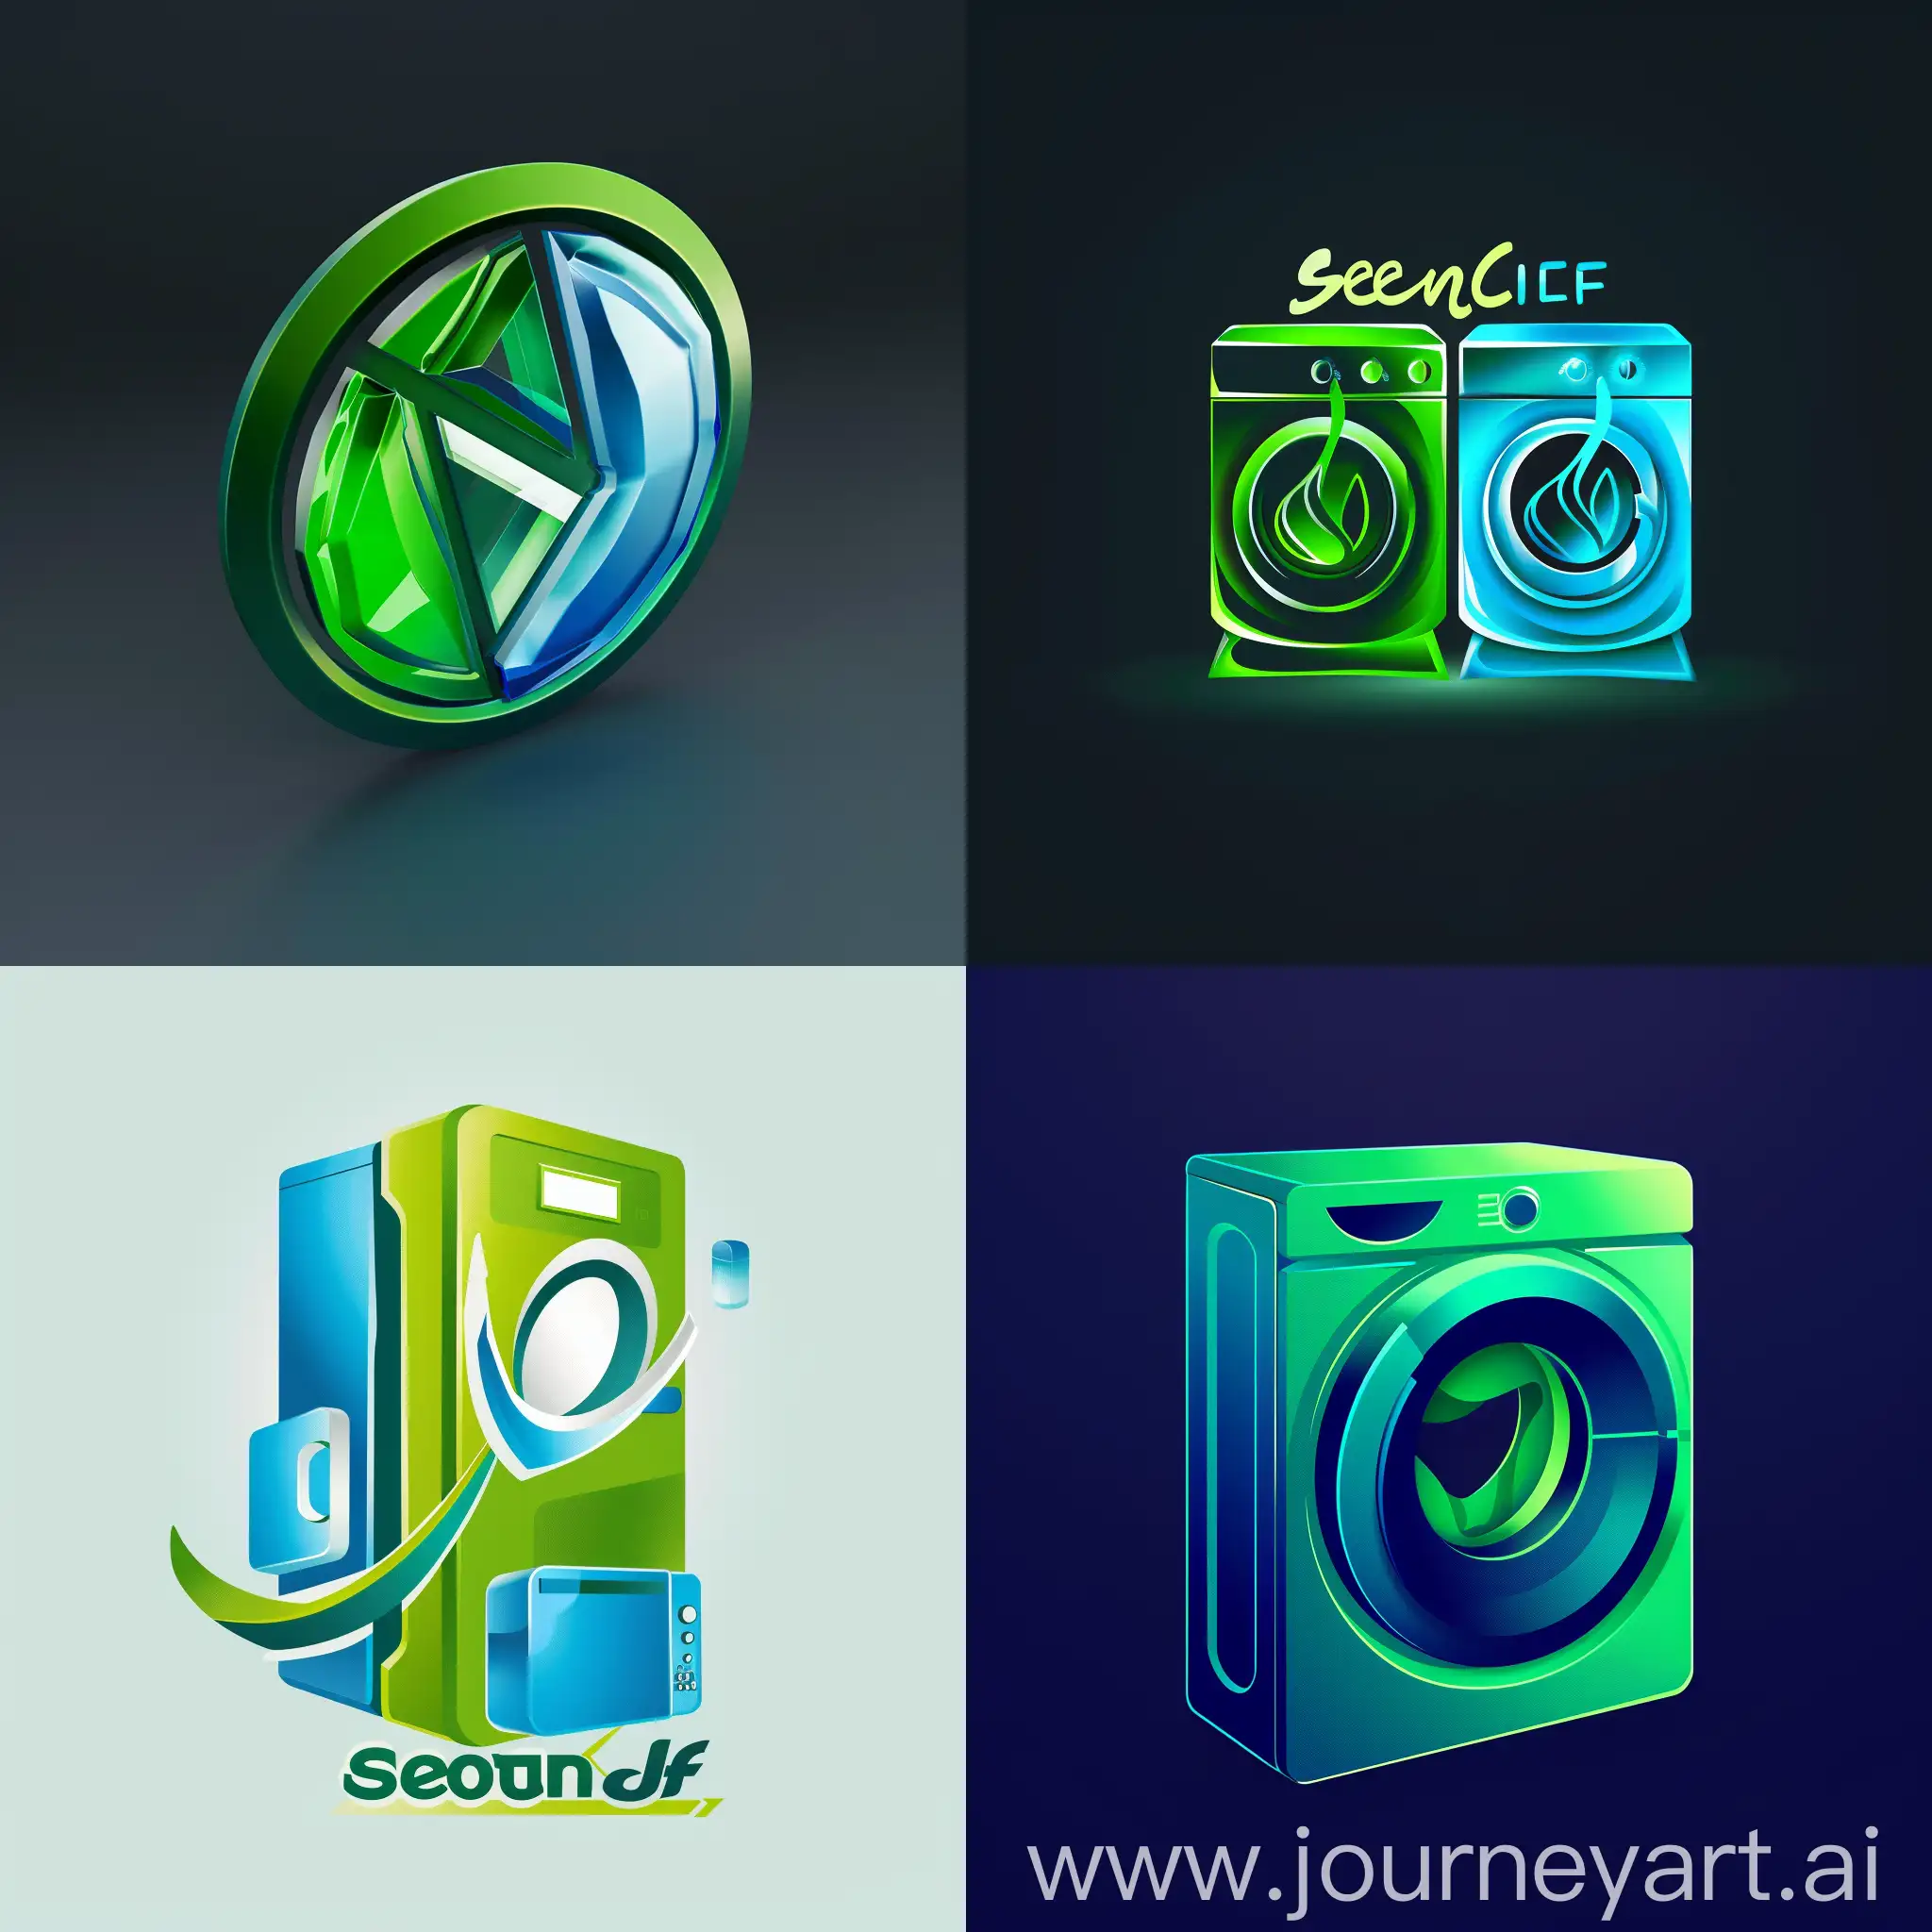 can you create a 10 killers logos for ''Second Life'' appliance company with green and blue colors